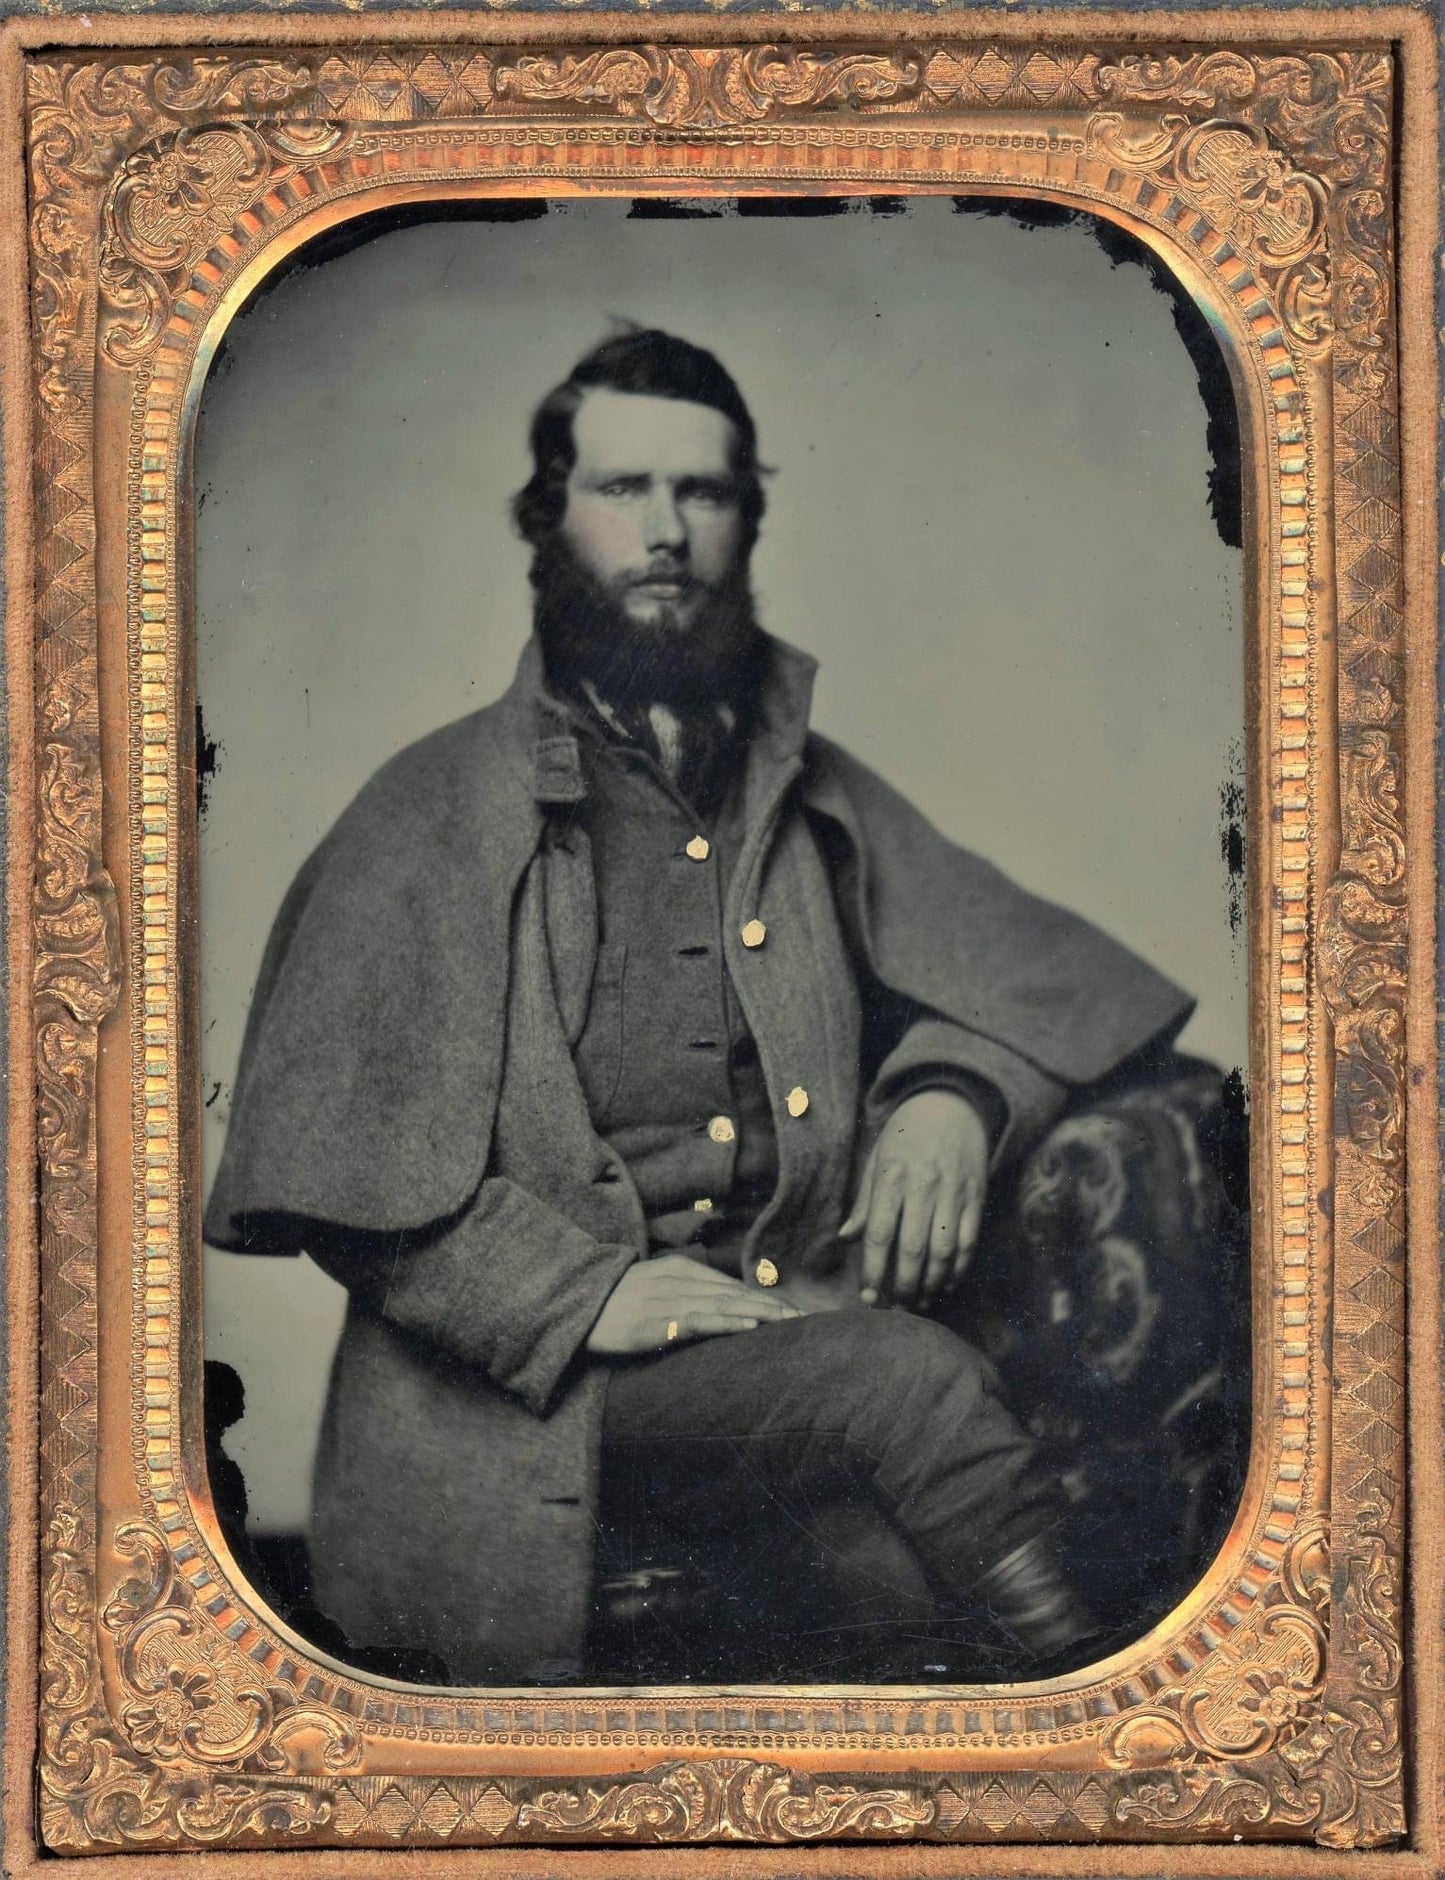 Army of the Potomac (Confederate) Overcoat 1861-1862